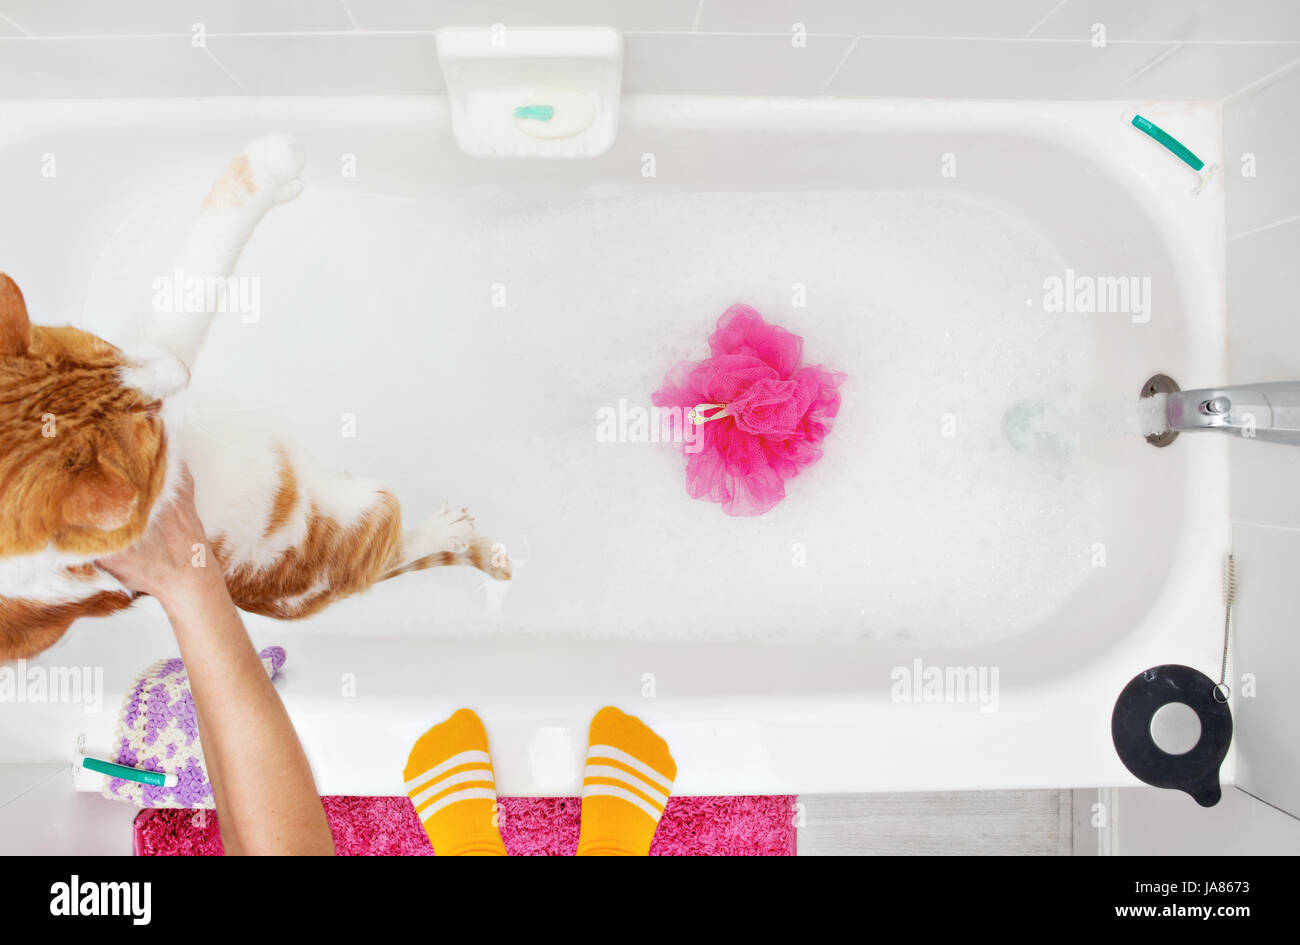 Orange cat being lowered into a bubble bath with water running. Stock Photo